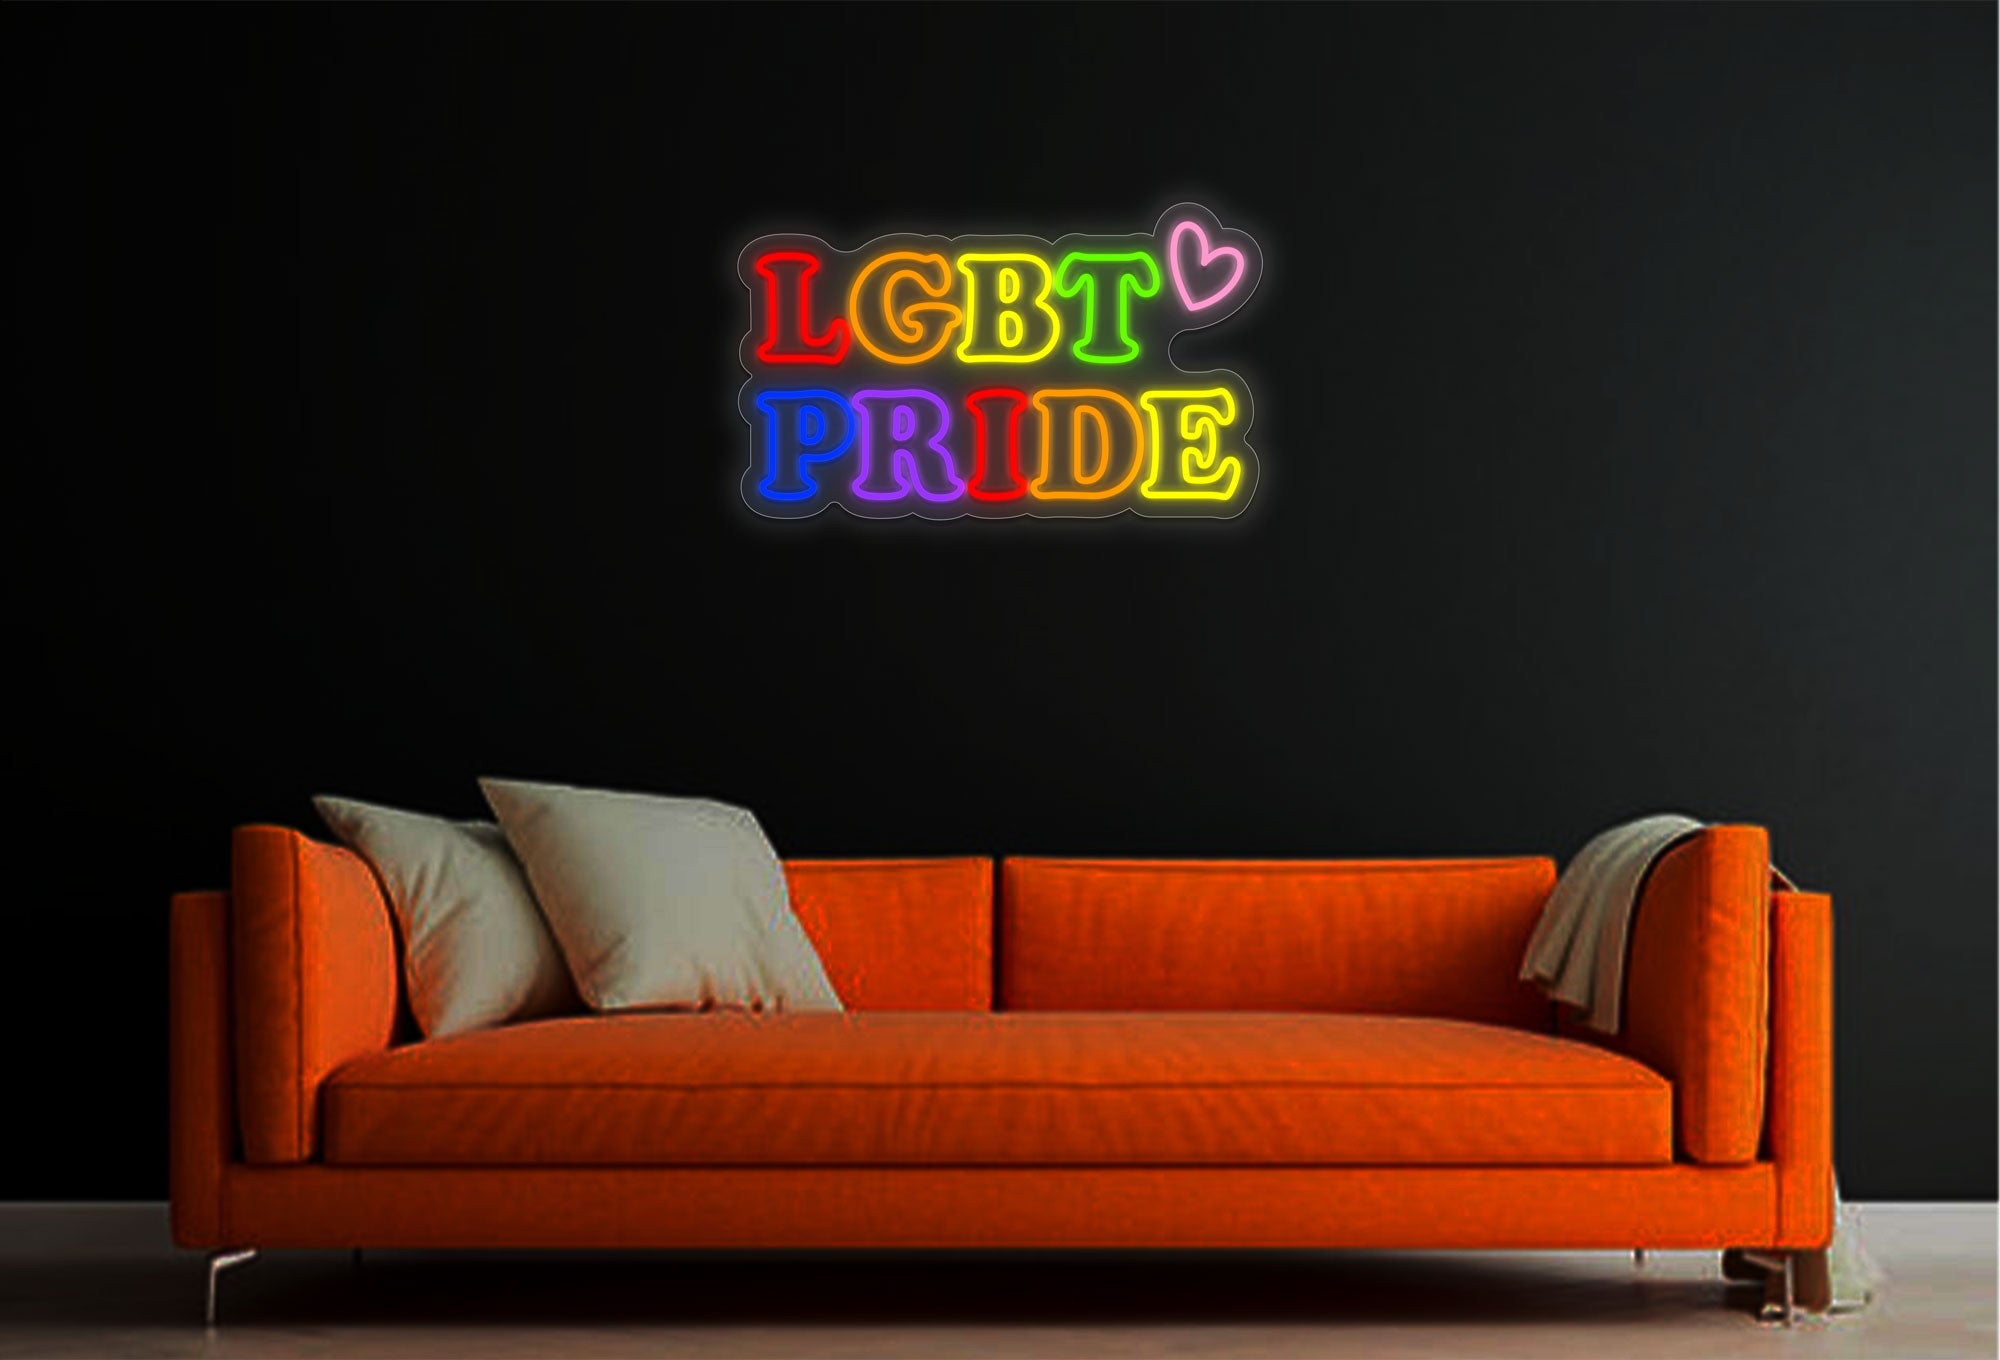 LGBTQ Pride with Heart LED Neon Sign